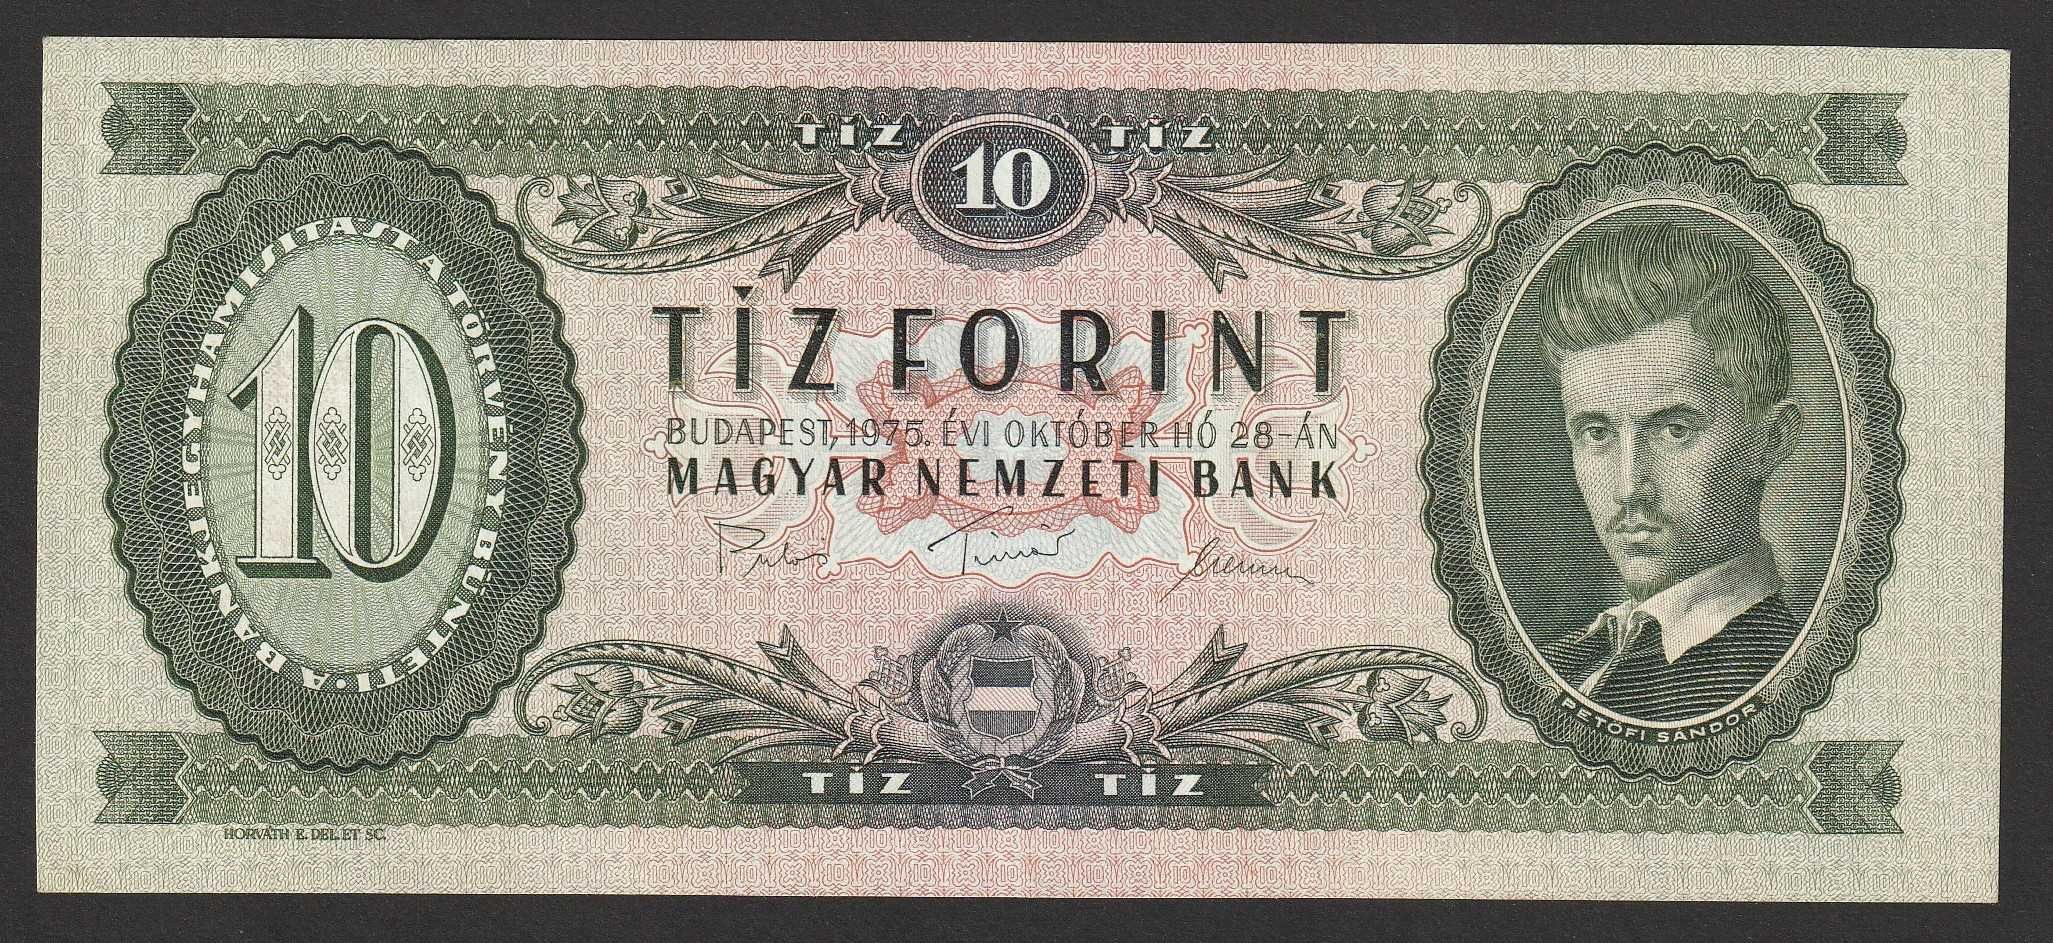 Węgry 10 forint 1975 - stan bankowy UNC -